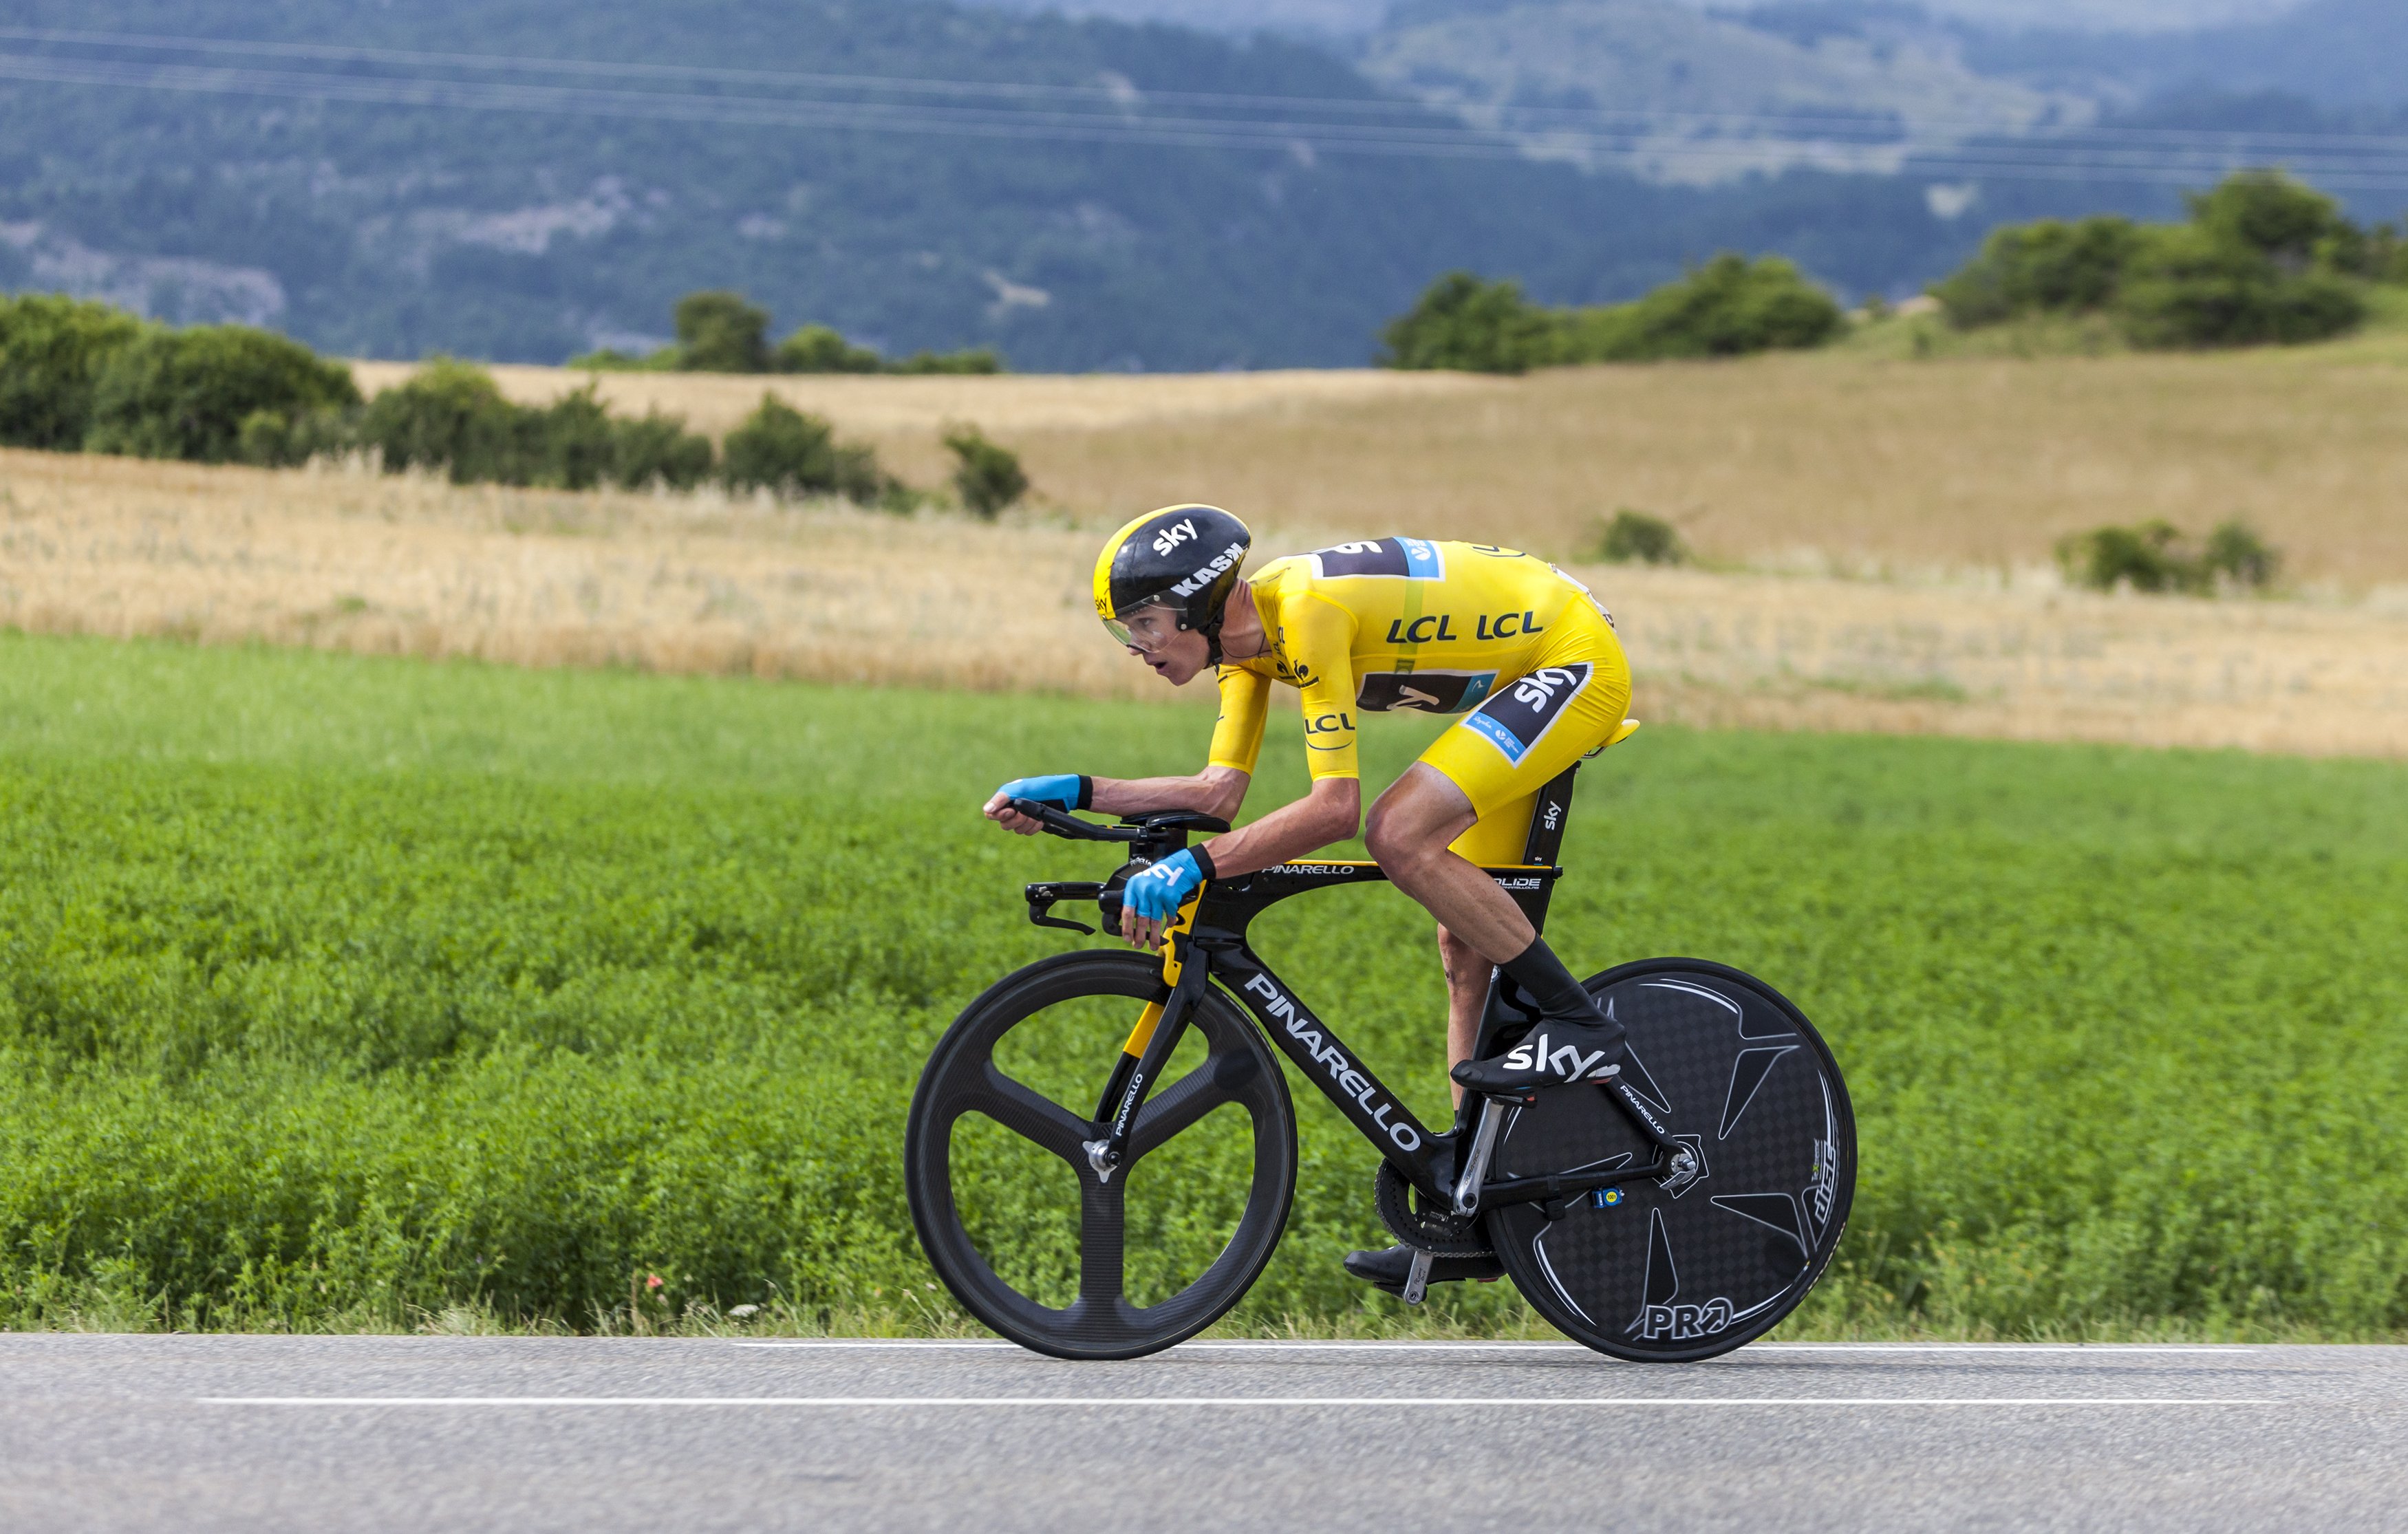 “froome